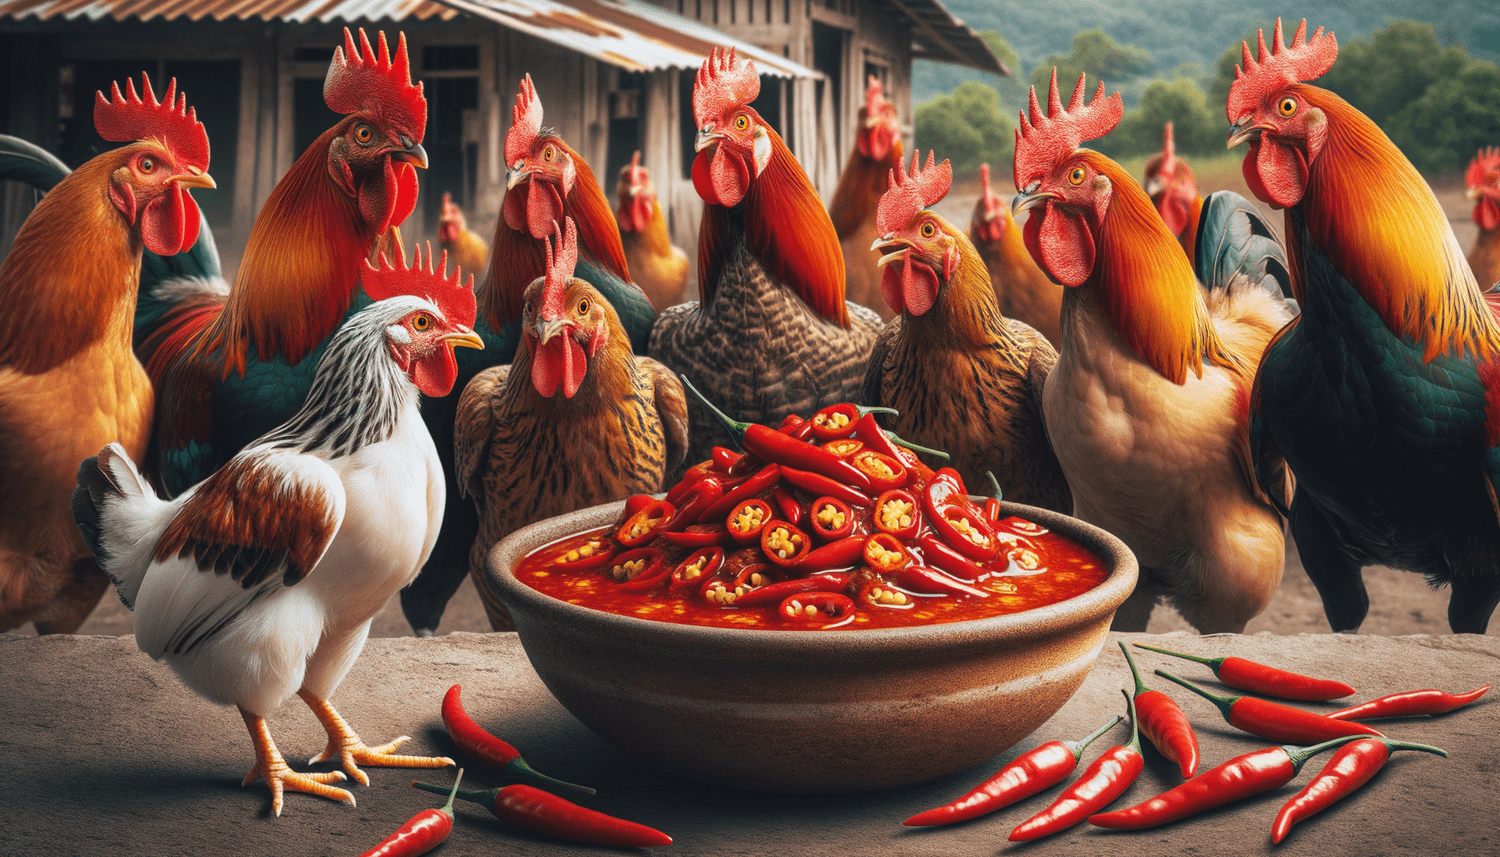 Can Chickens Eat Chili?